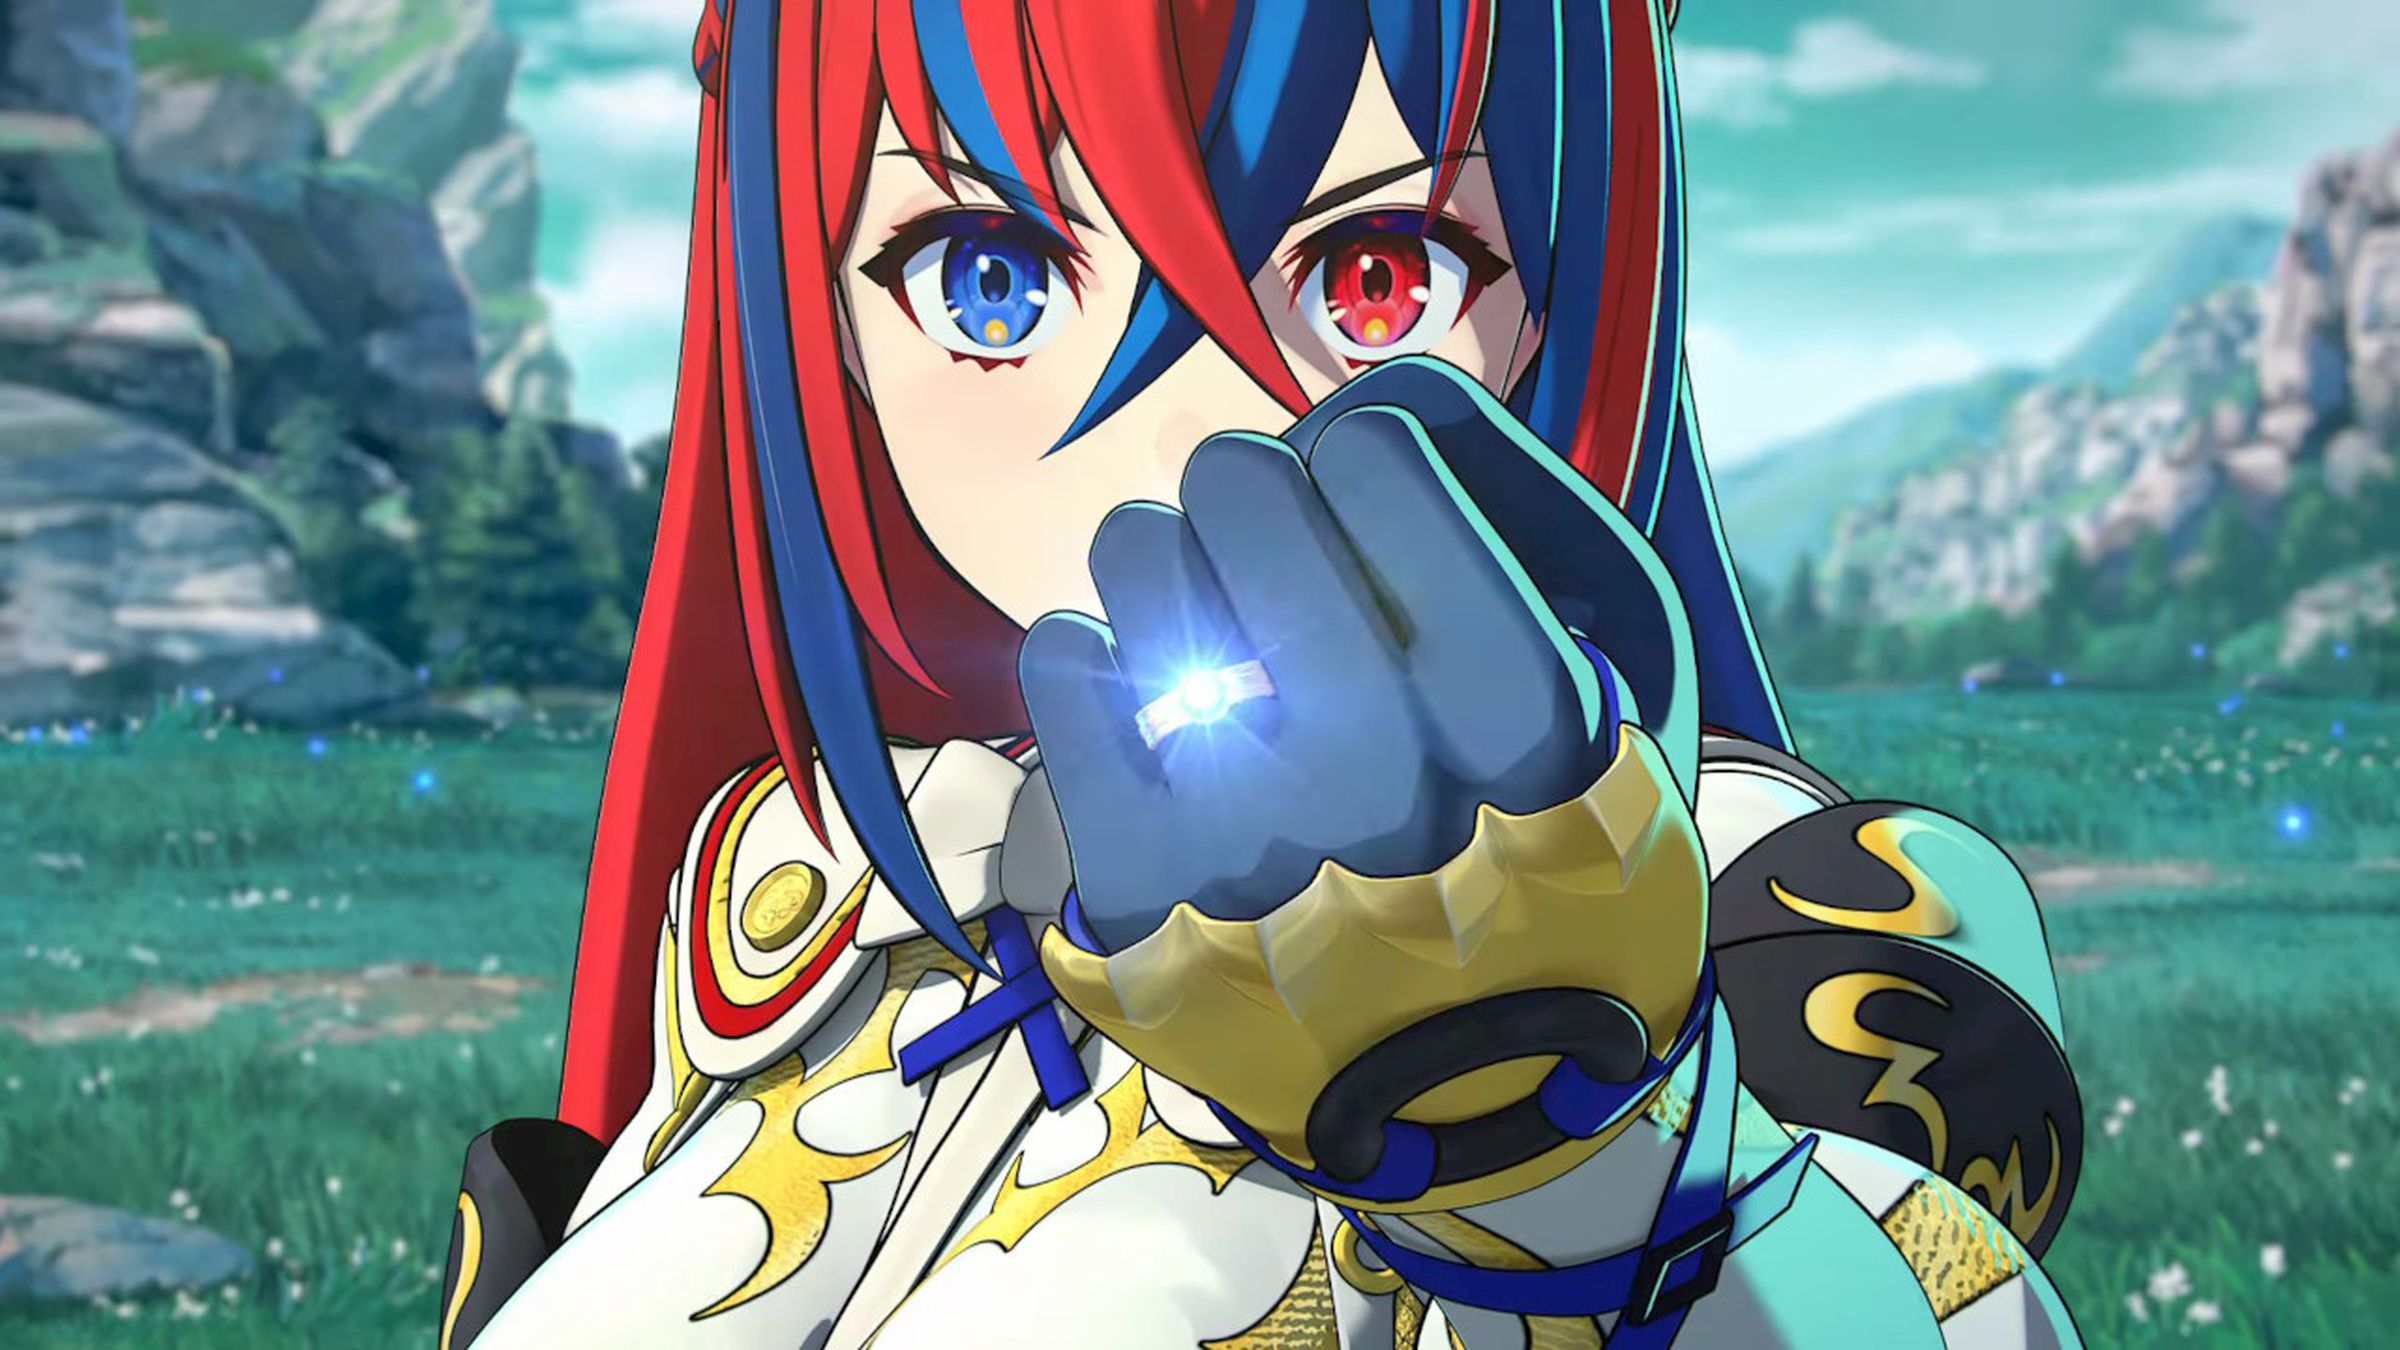 Screenshot from Fire Emblem Engage featuring the main character Alear, a person with red- and blue-colored hair and eyes holding up a clenched fist showing off their Engage ring.